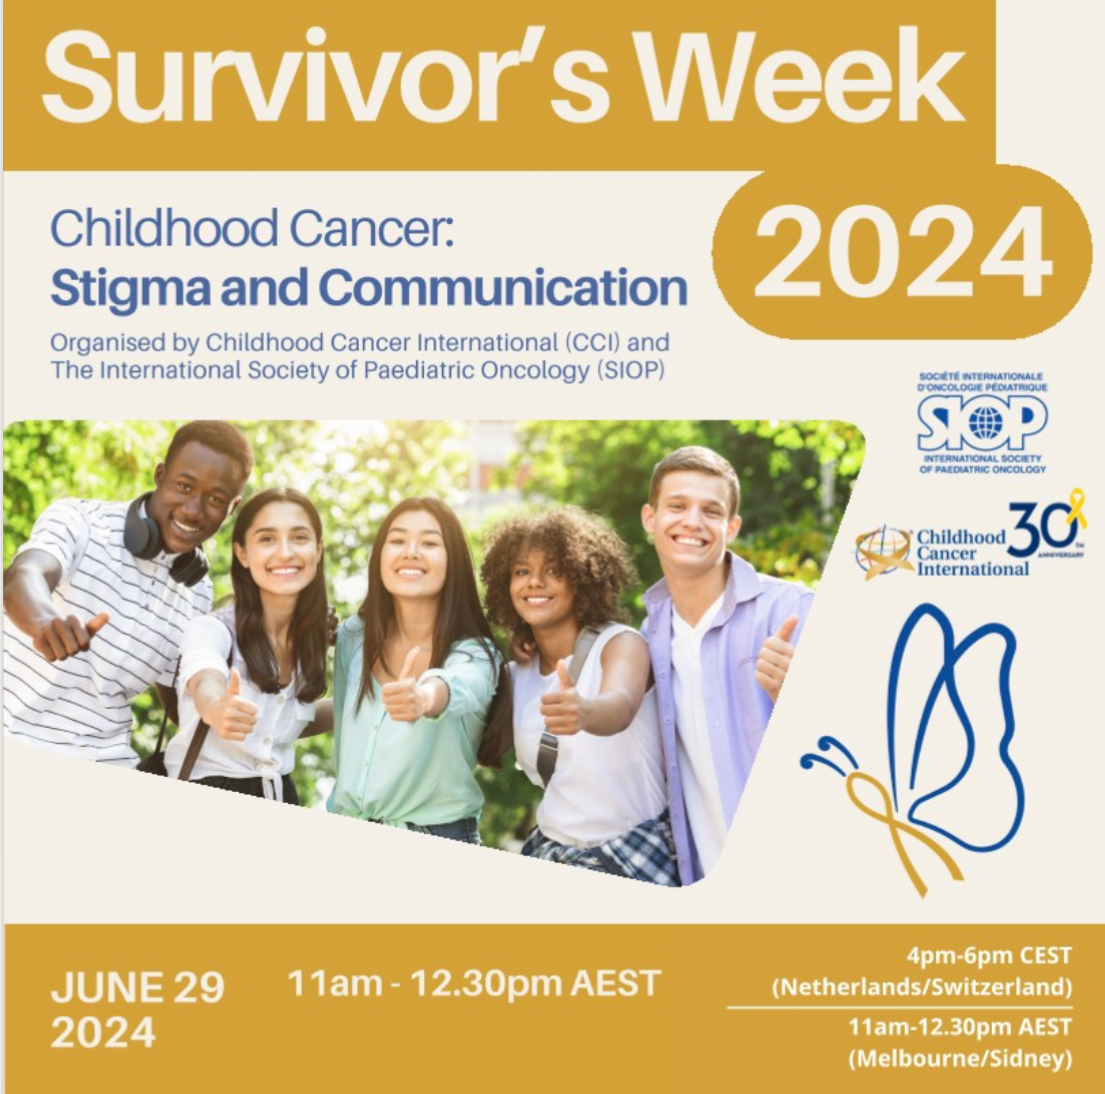 Join CCI and SIOP for a 2-hour webinar on June 29, 2024